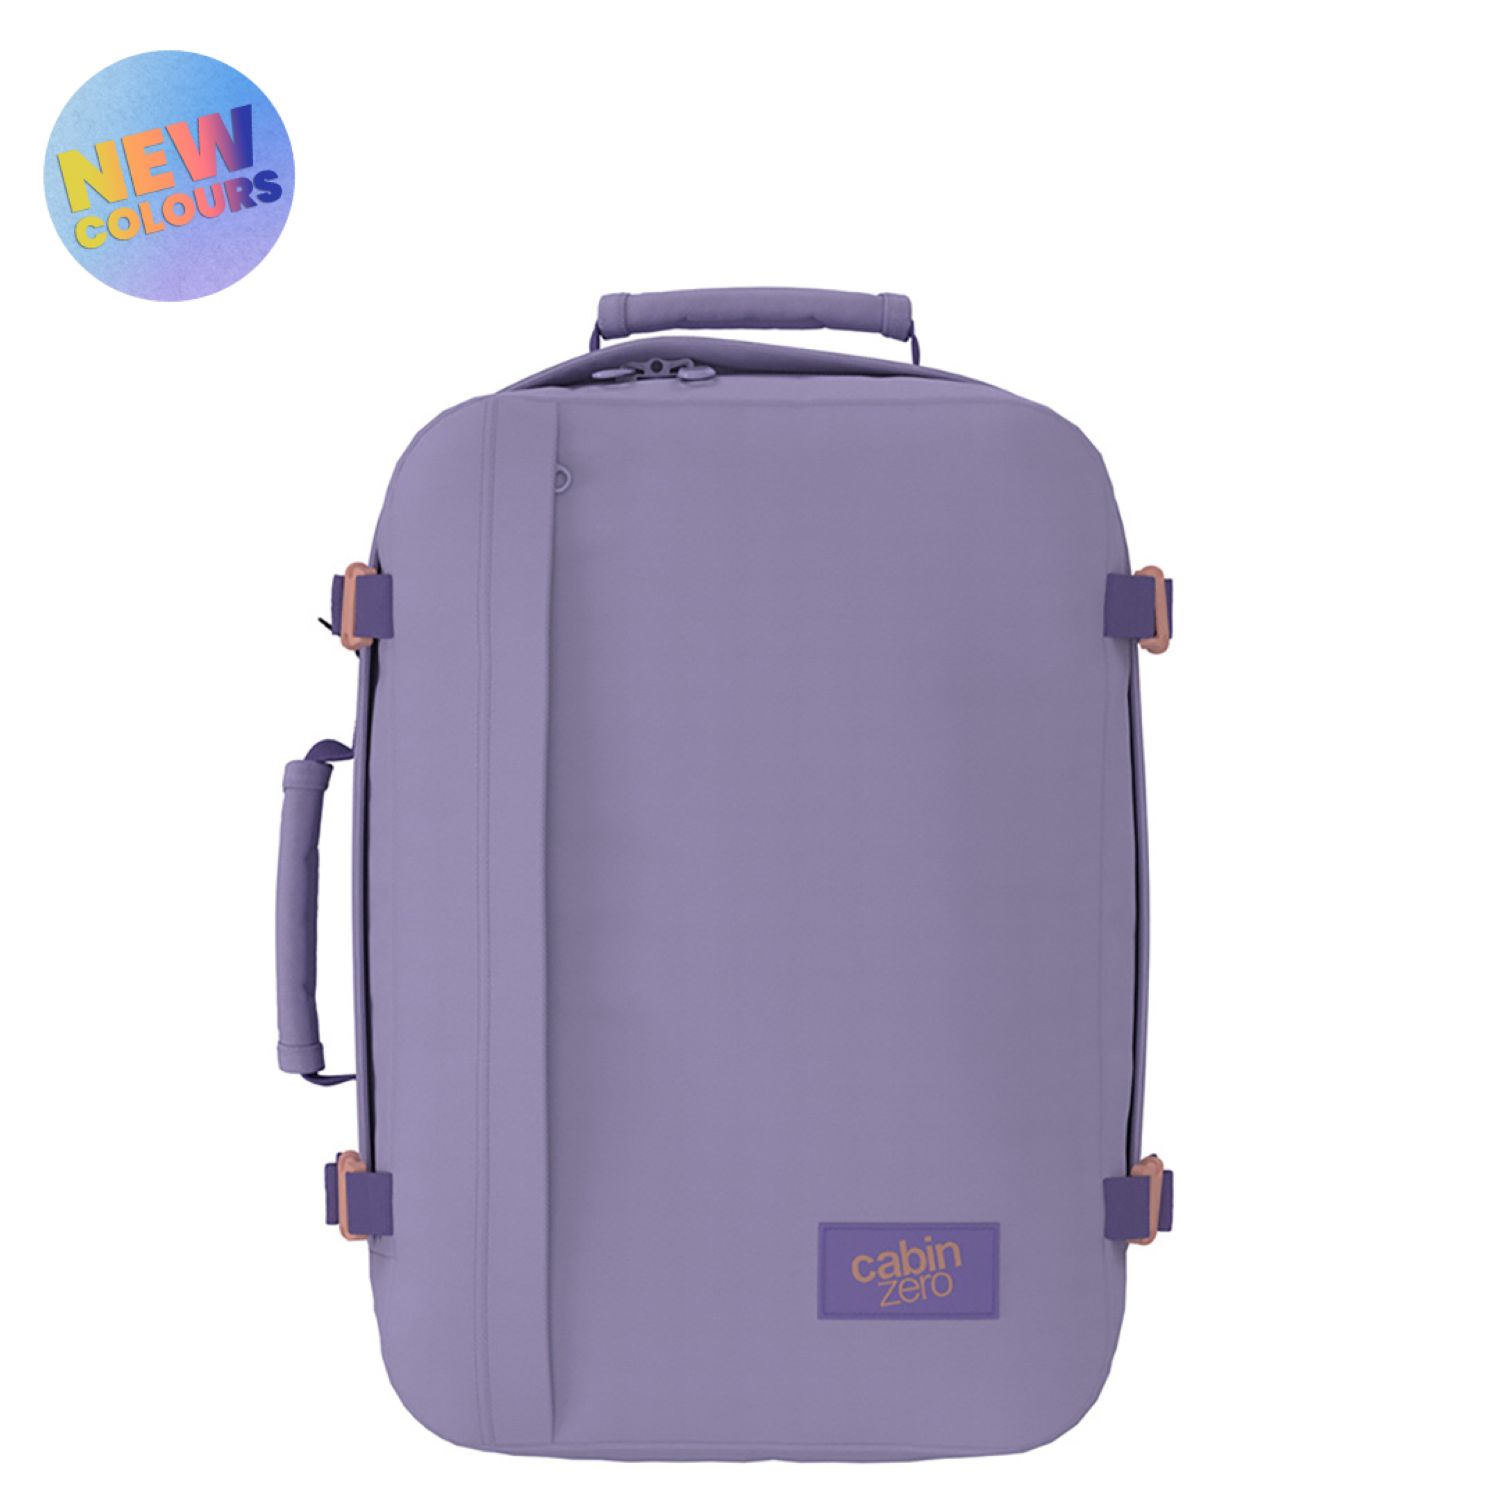 Buy Cabinzero Classic Ultra Light Cabin Bag With Luggage Trackers 36L  (Smokey Violet) in Singapore & Malaysia - The Wallet Shop